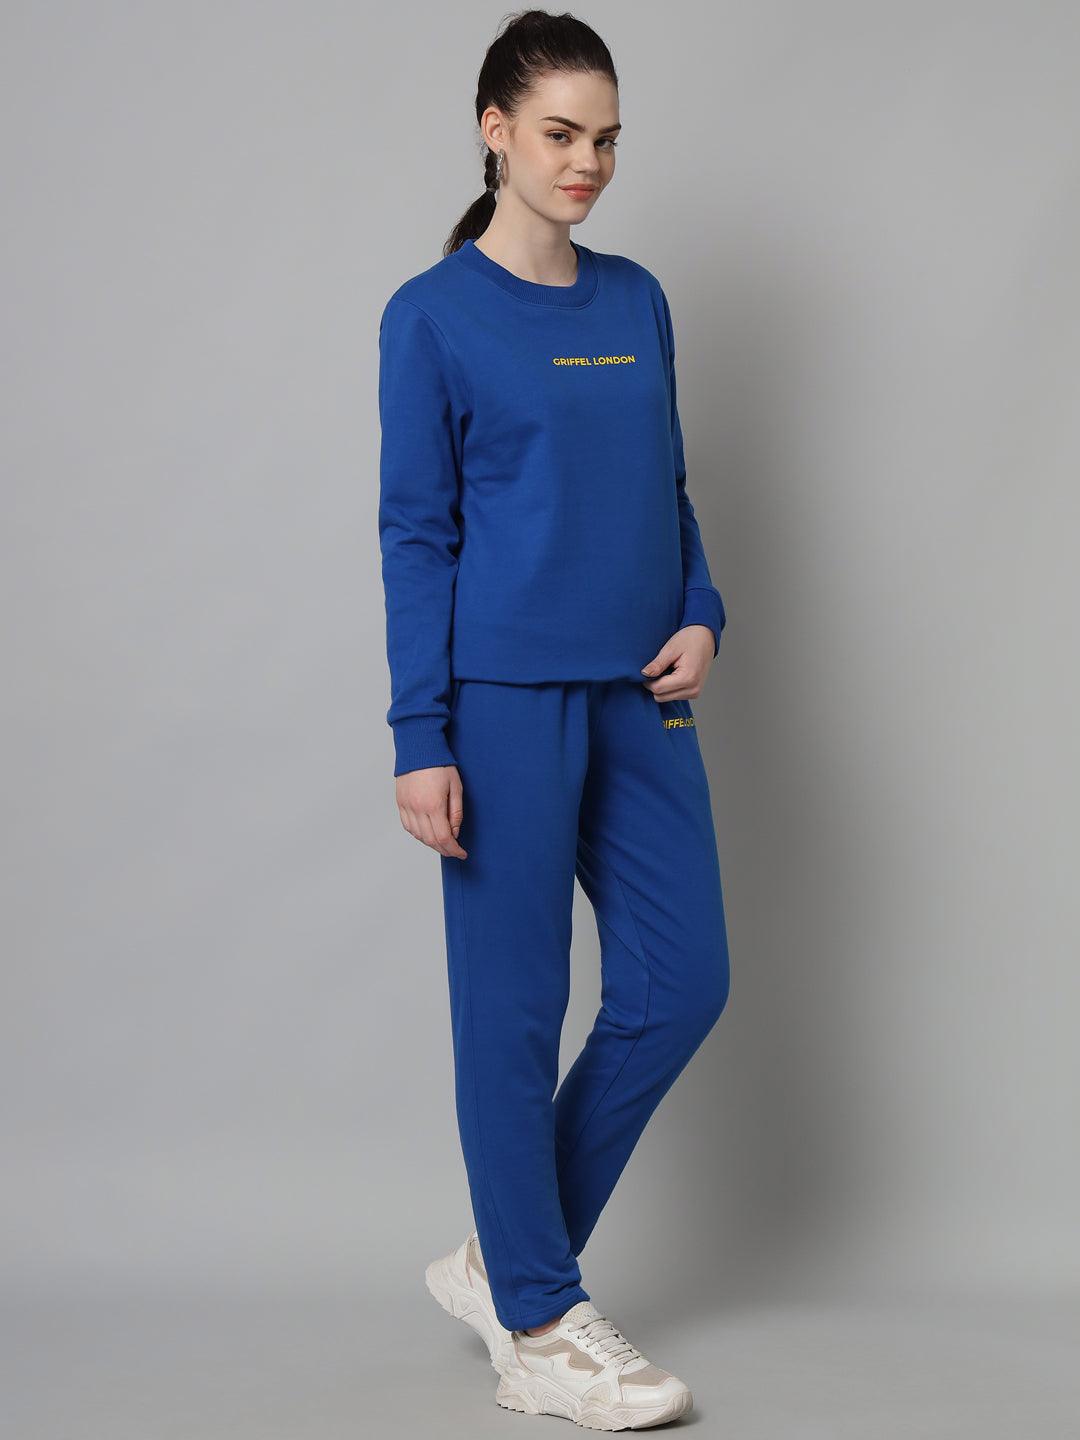 Griffel Women Solid Fleece Basic Round Neck Sweatshirt and Joggers Full set Royal Tracksuit - griffel